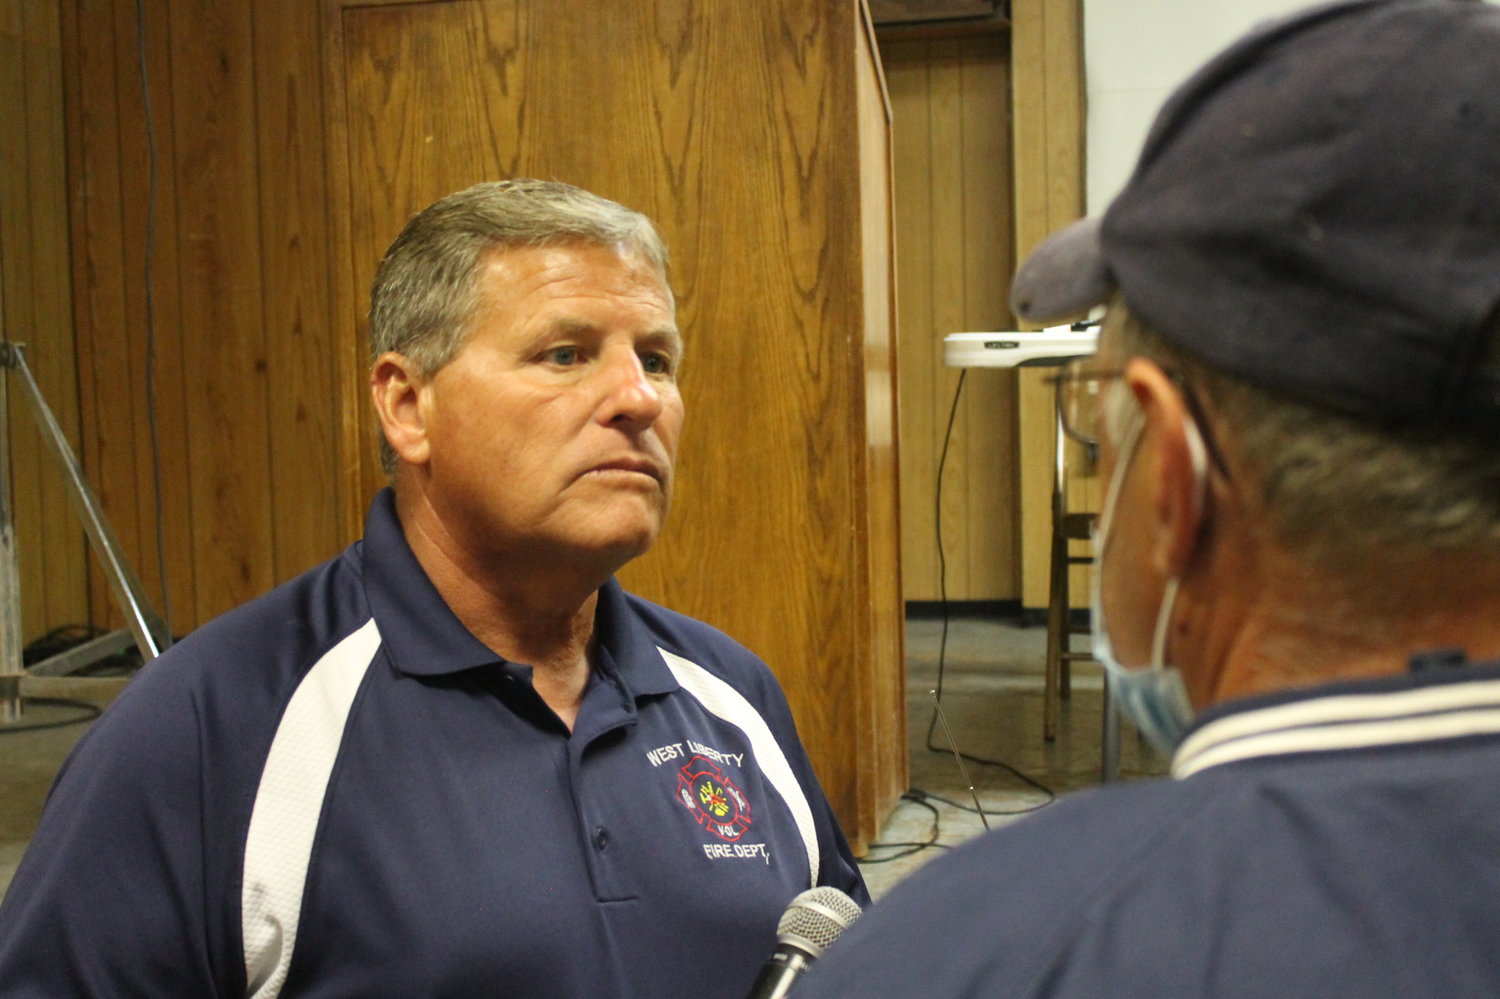 West Liberty Fire Chief Kirt Sickels answers a question at a recent public meeting.